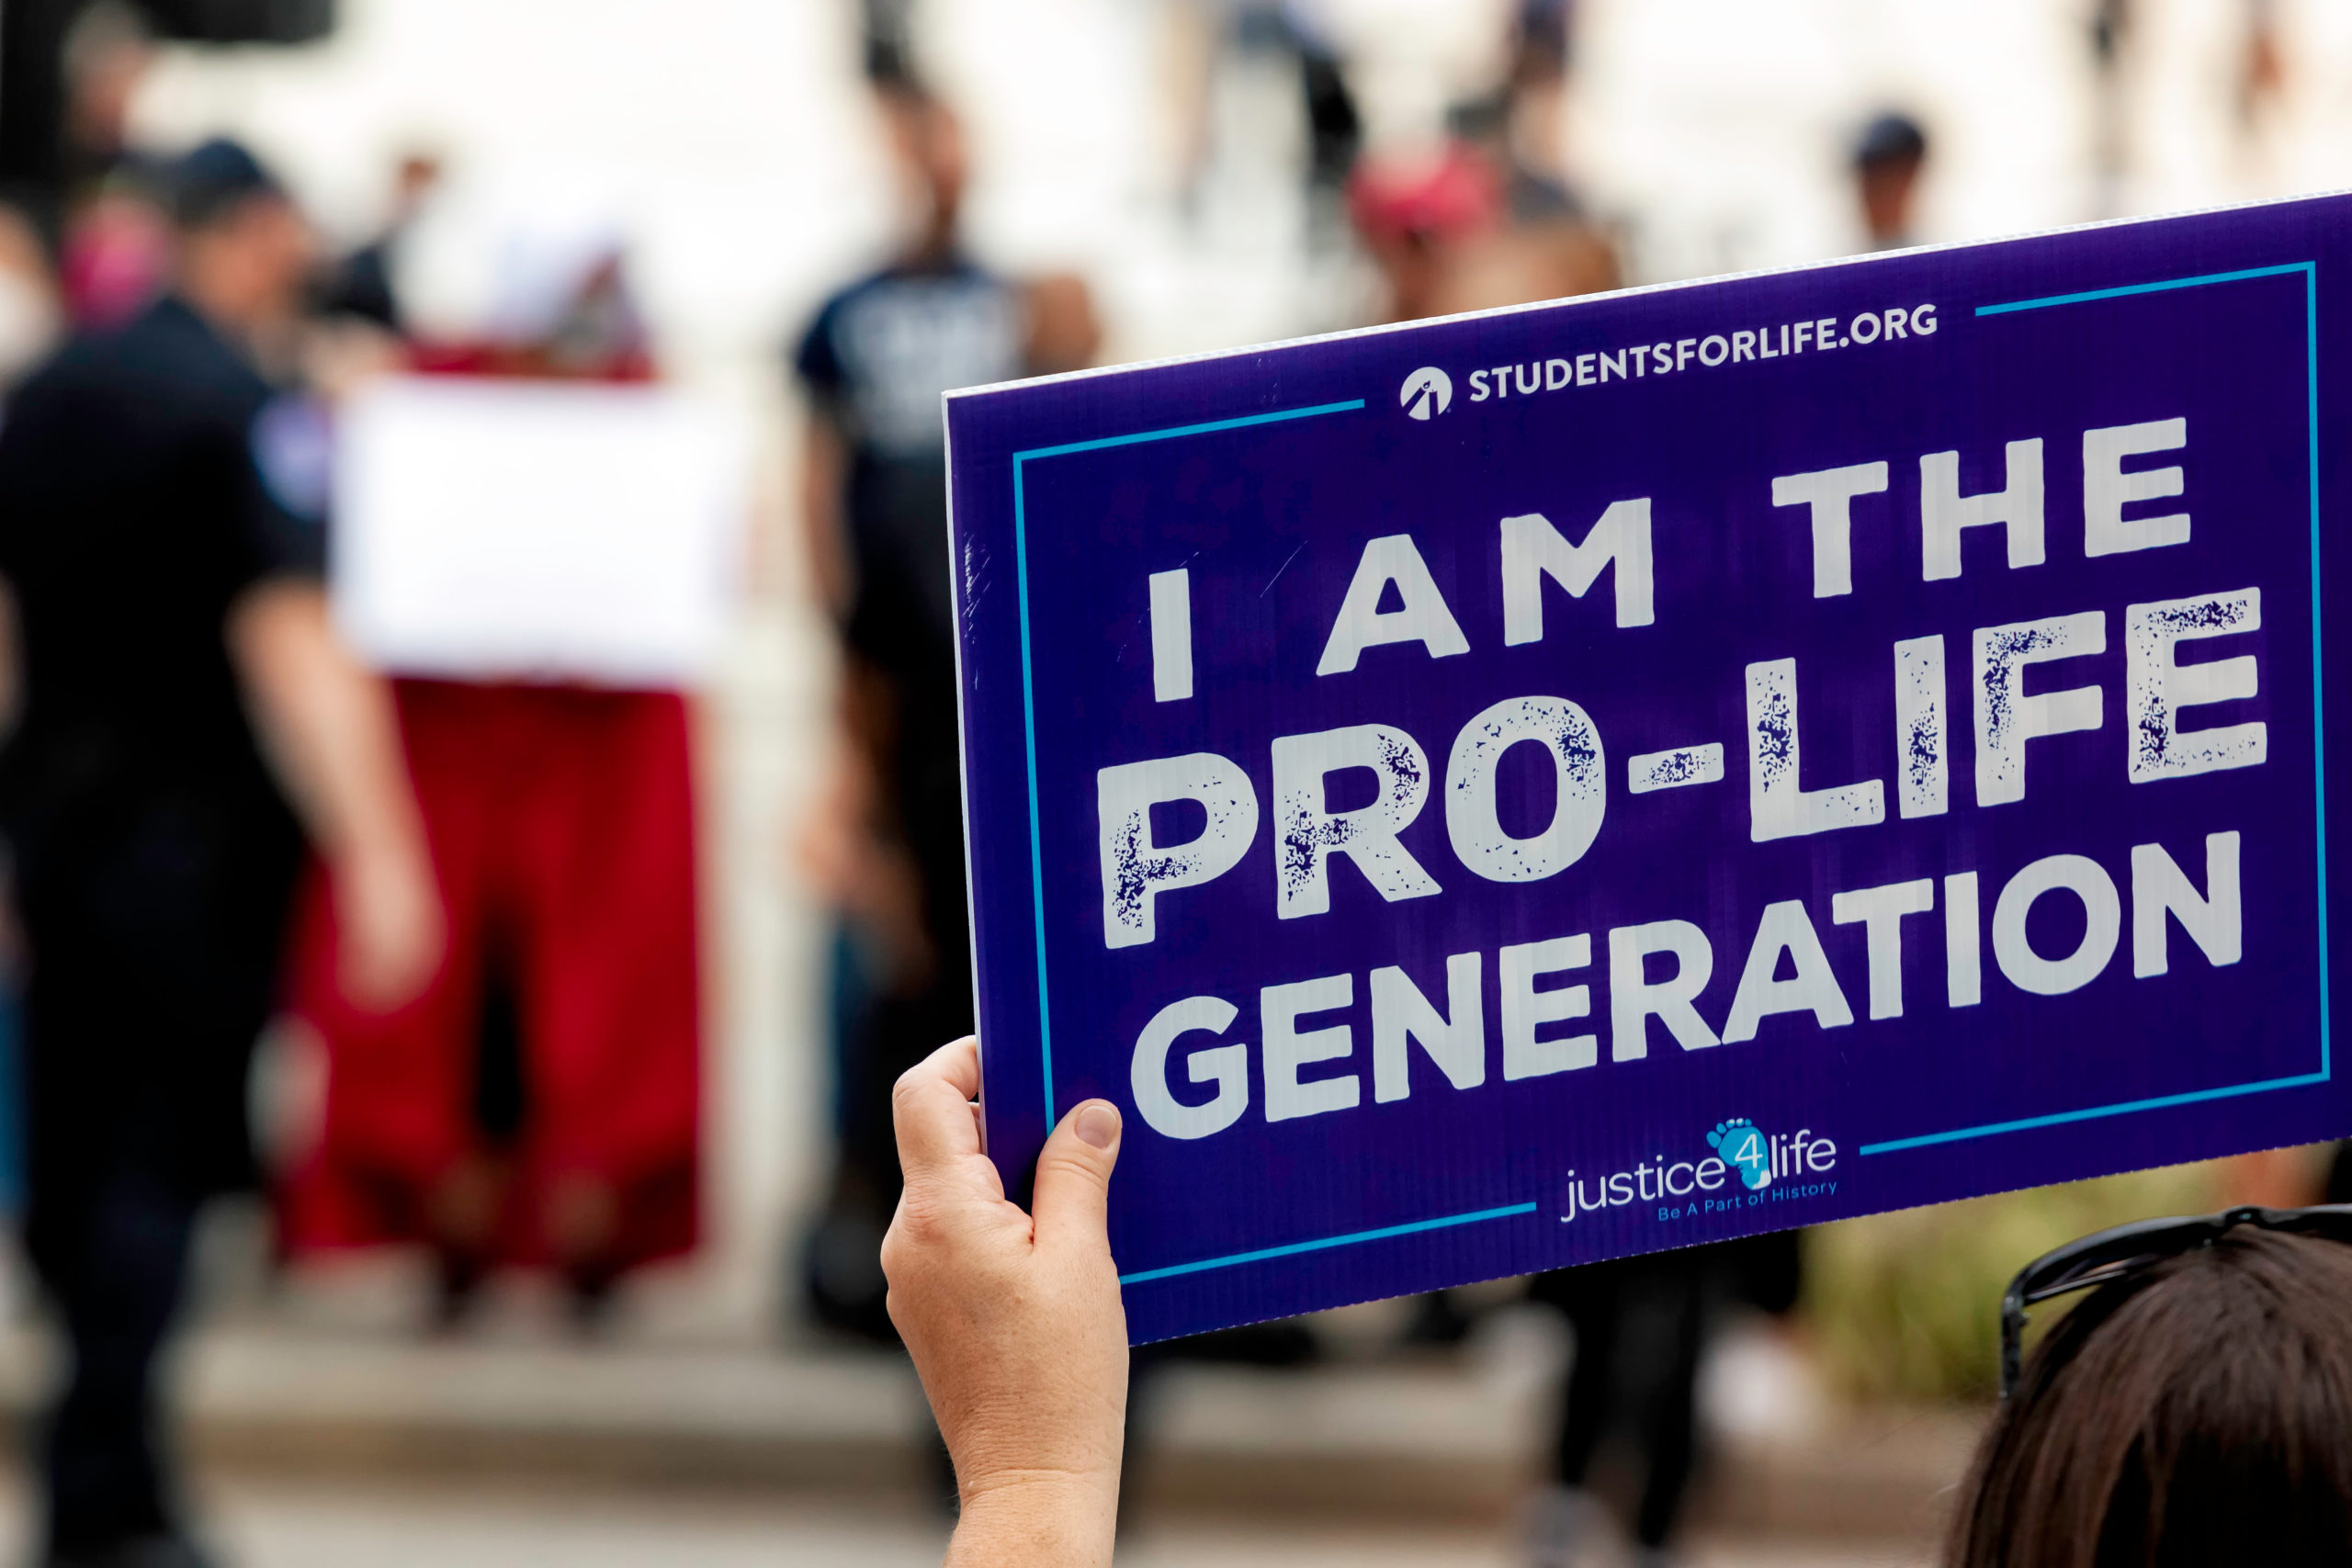 Human Coalition Action and Students for Life of America File Amicus Brief Calling to End Roe